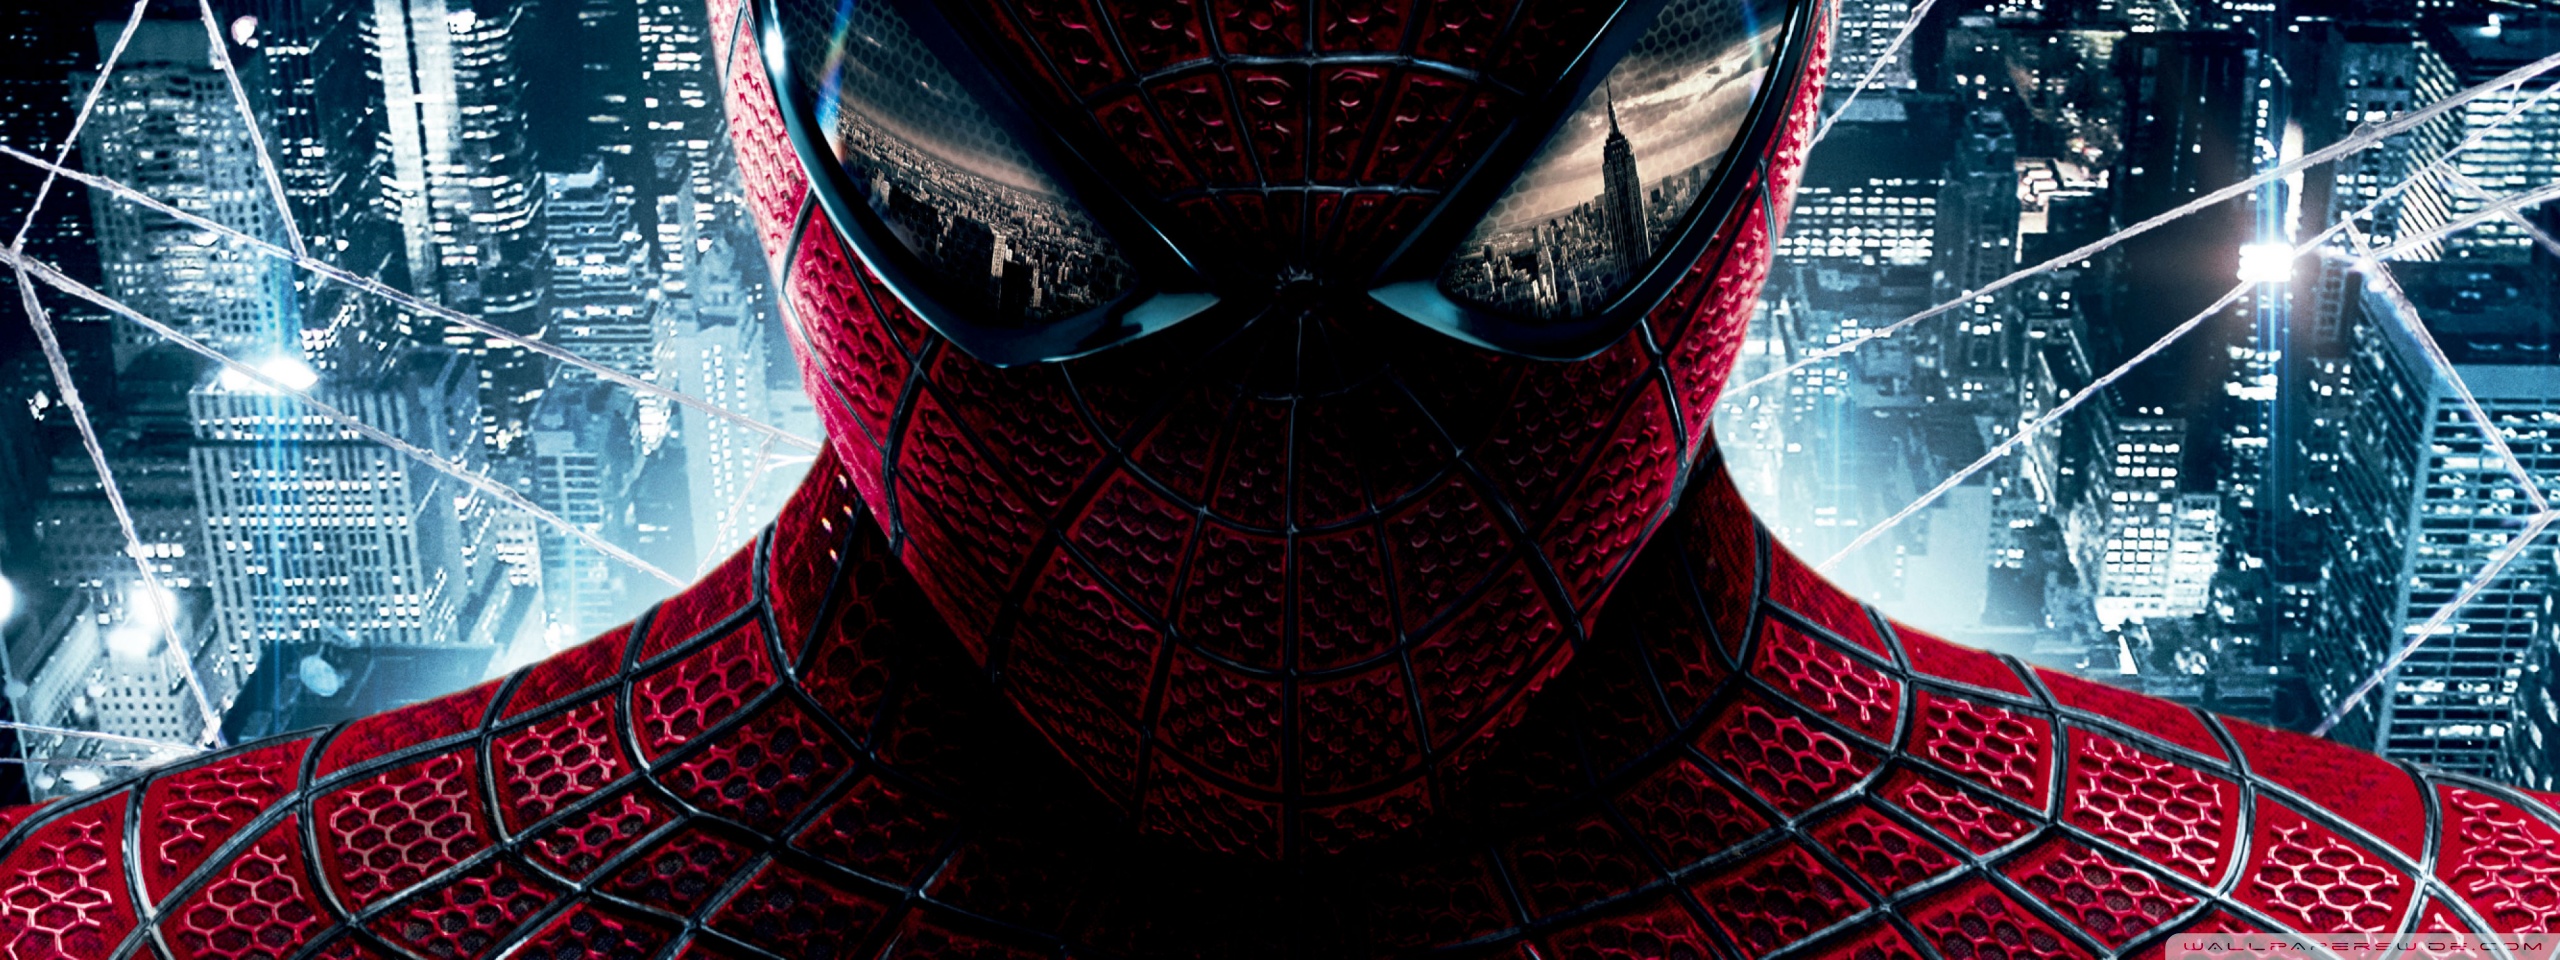 The Amazing Spiderman (2012) Ultra HD Desktop Background Wallpaper for: Multi Display, Dual Monitor, Tablet